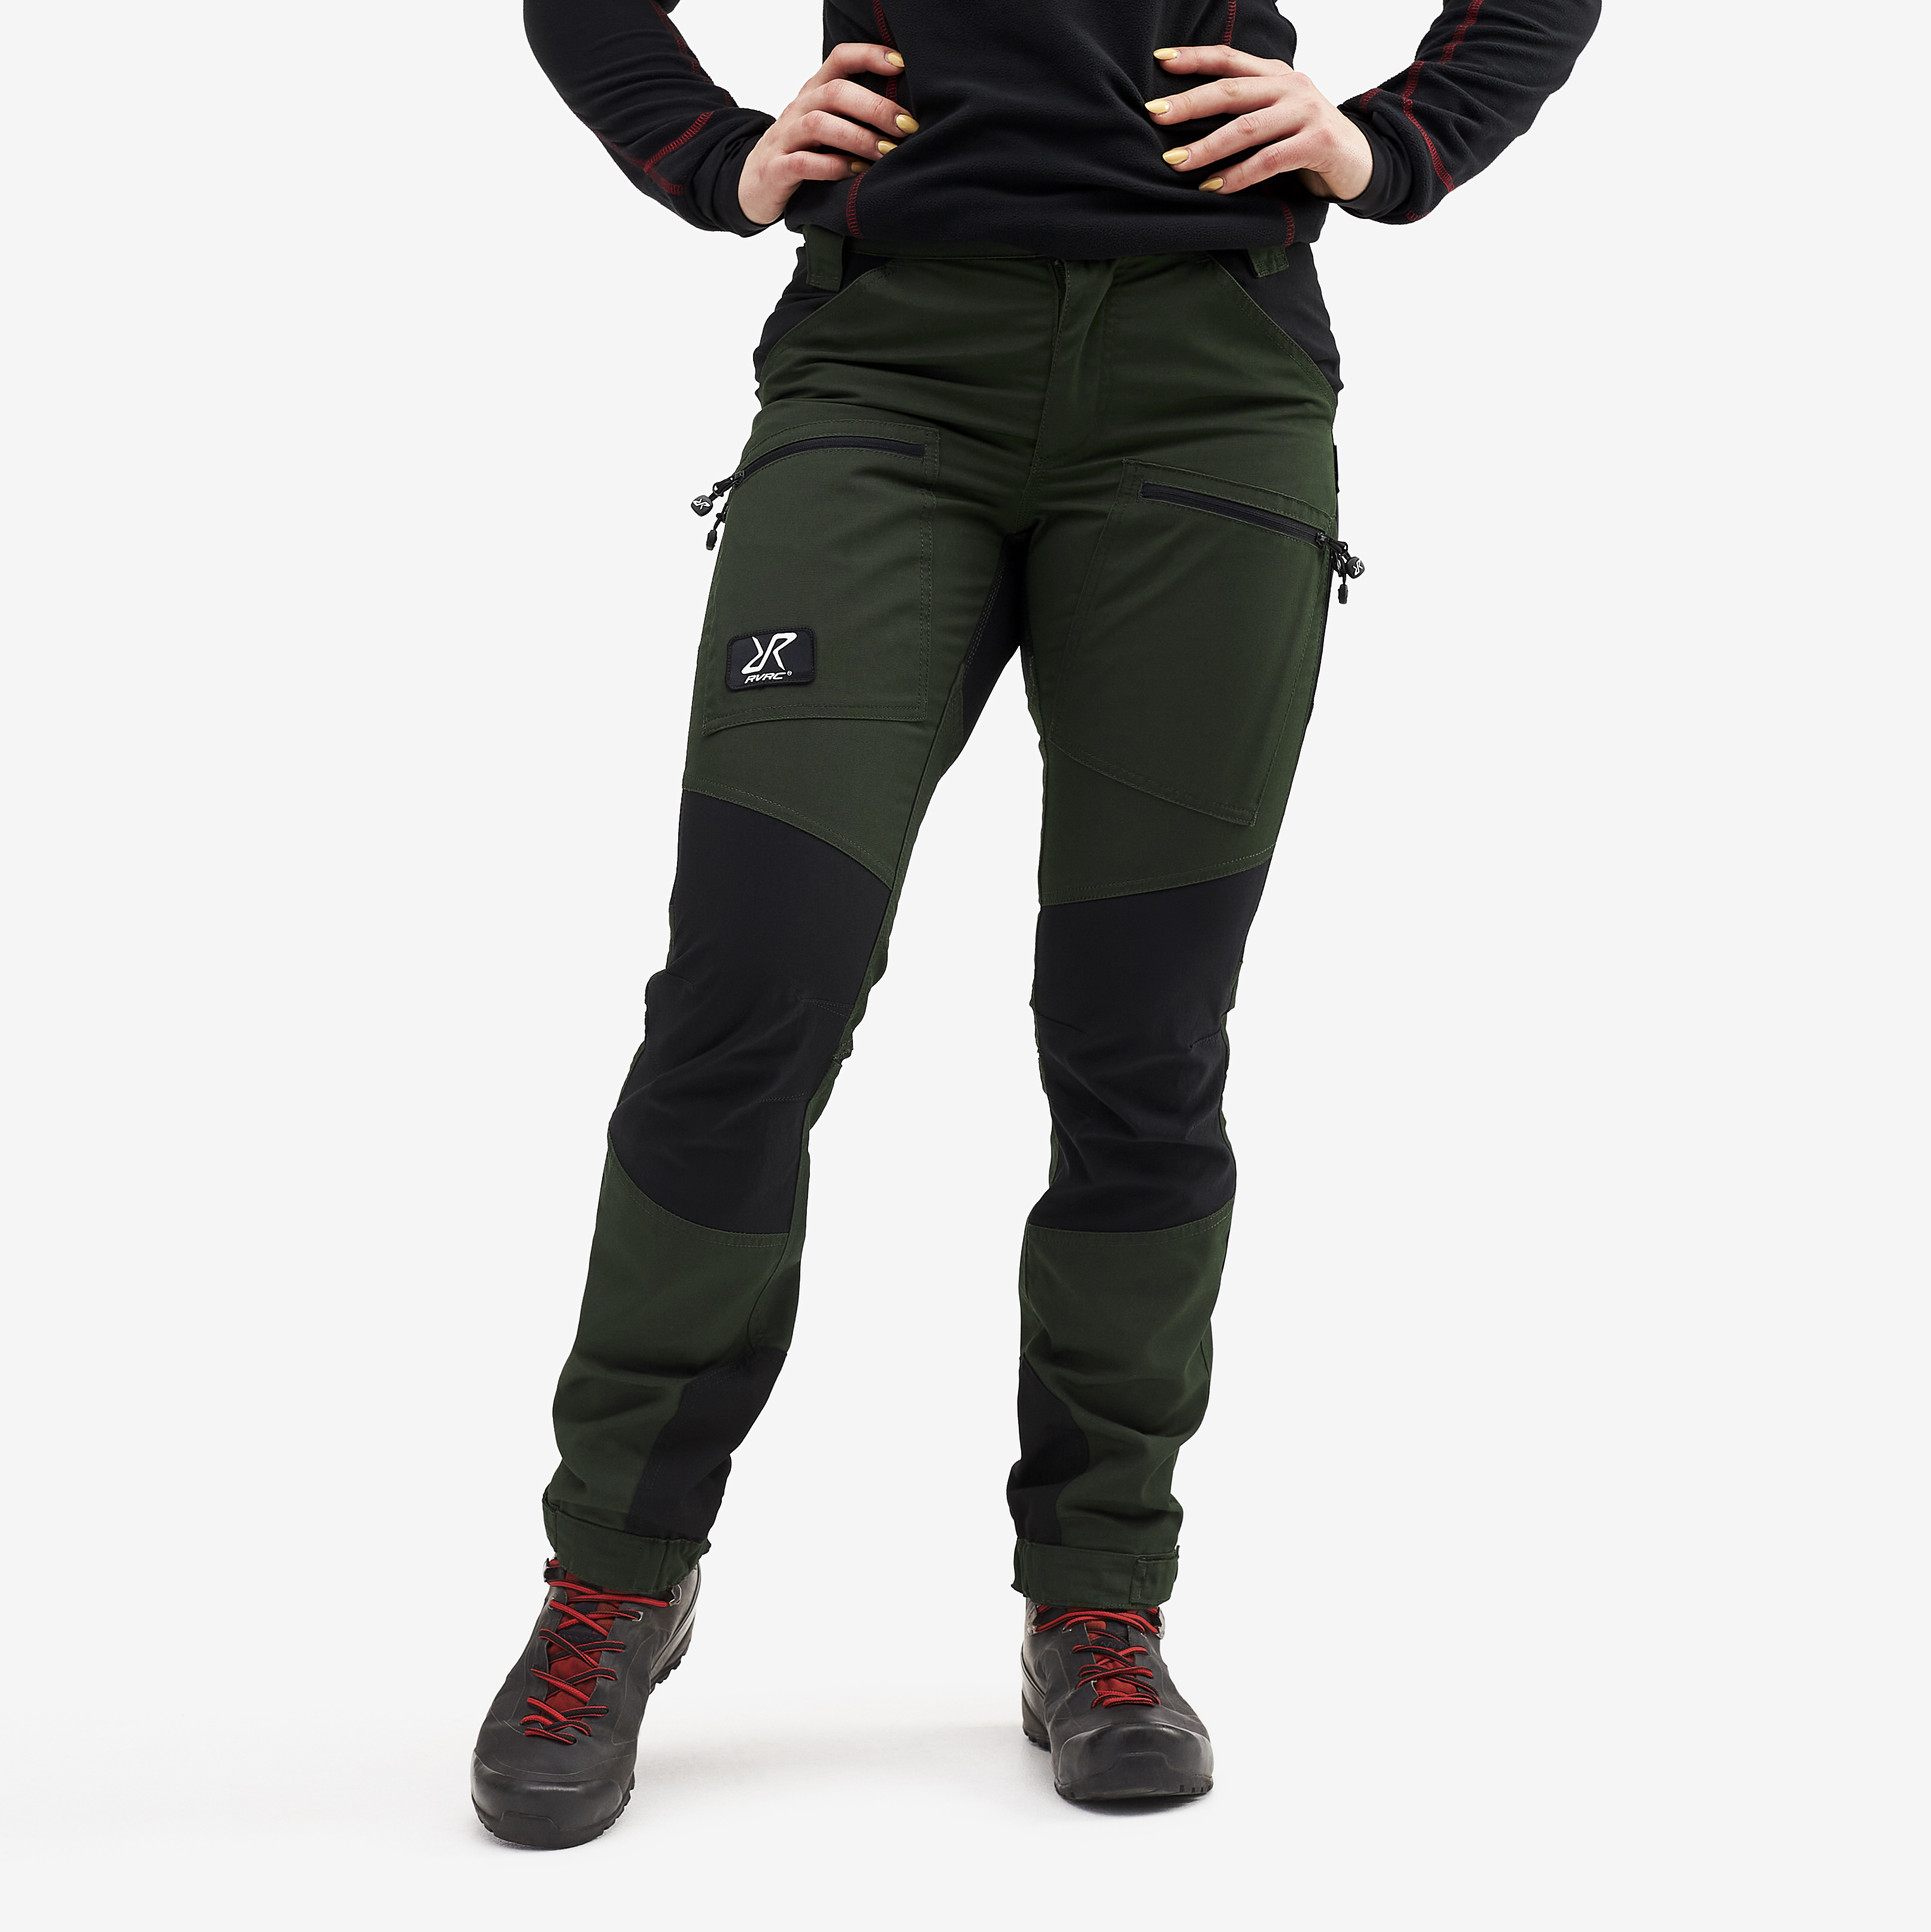 Nordwand Pro Short hiking pants for women in green